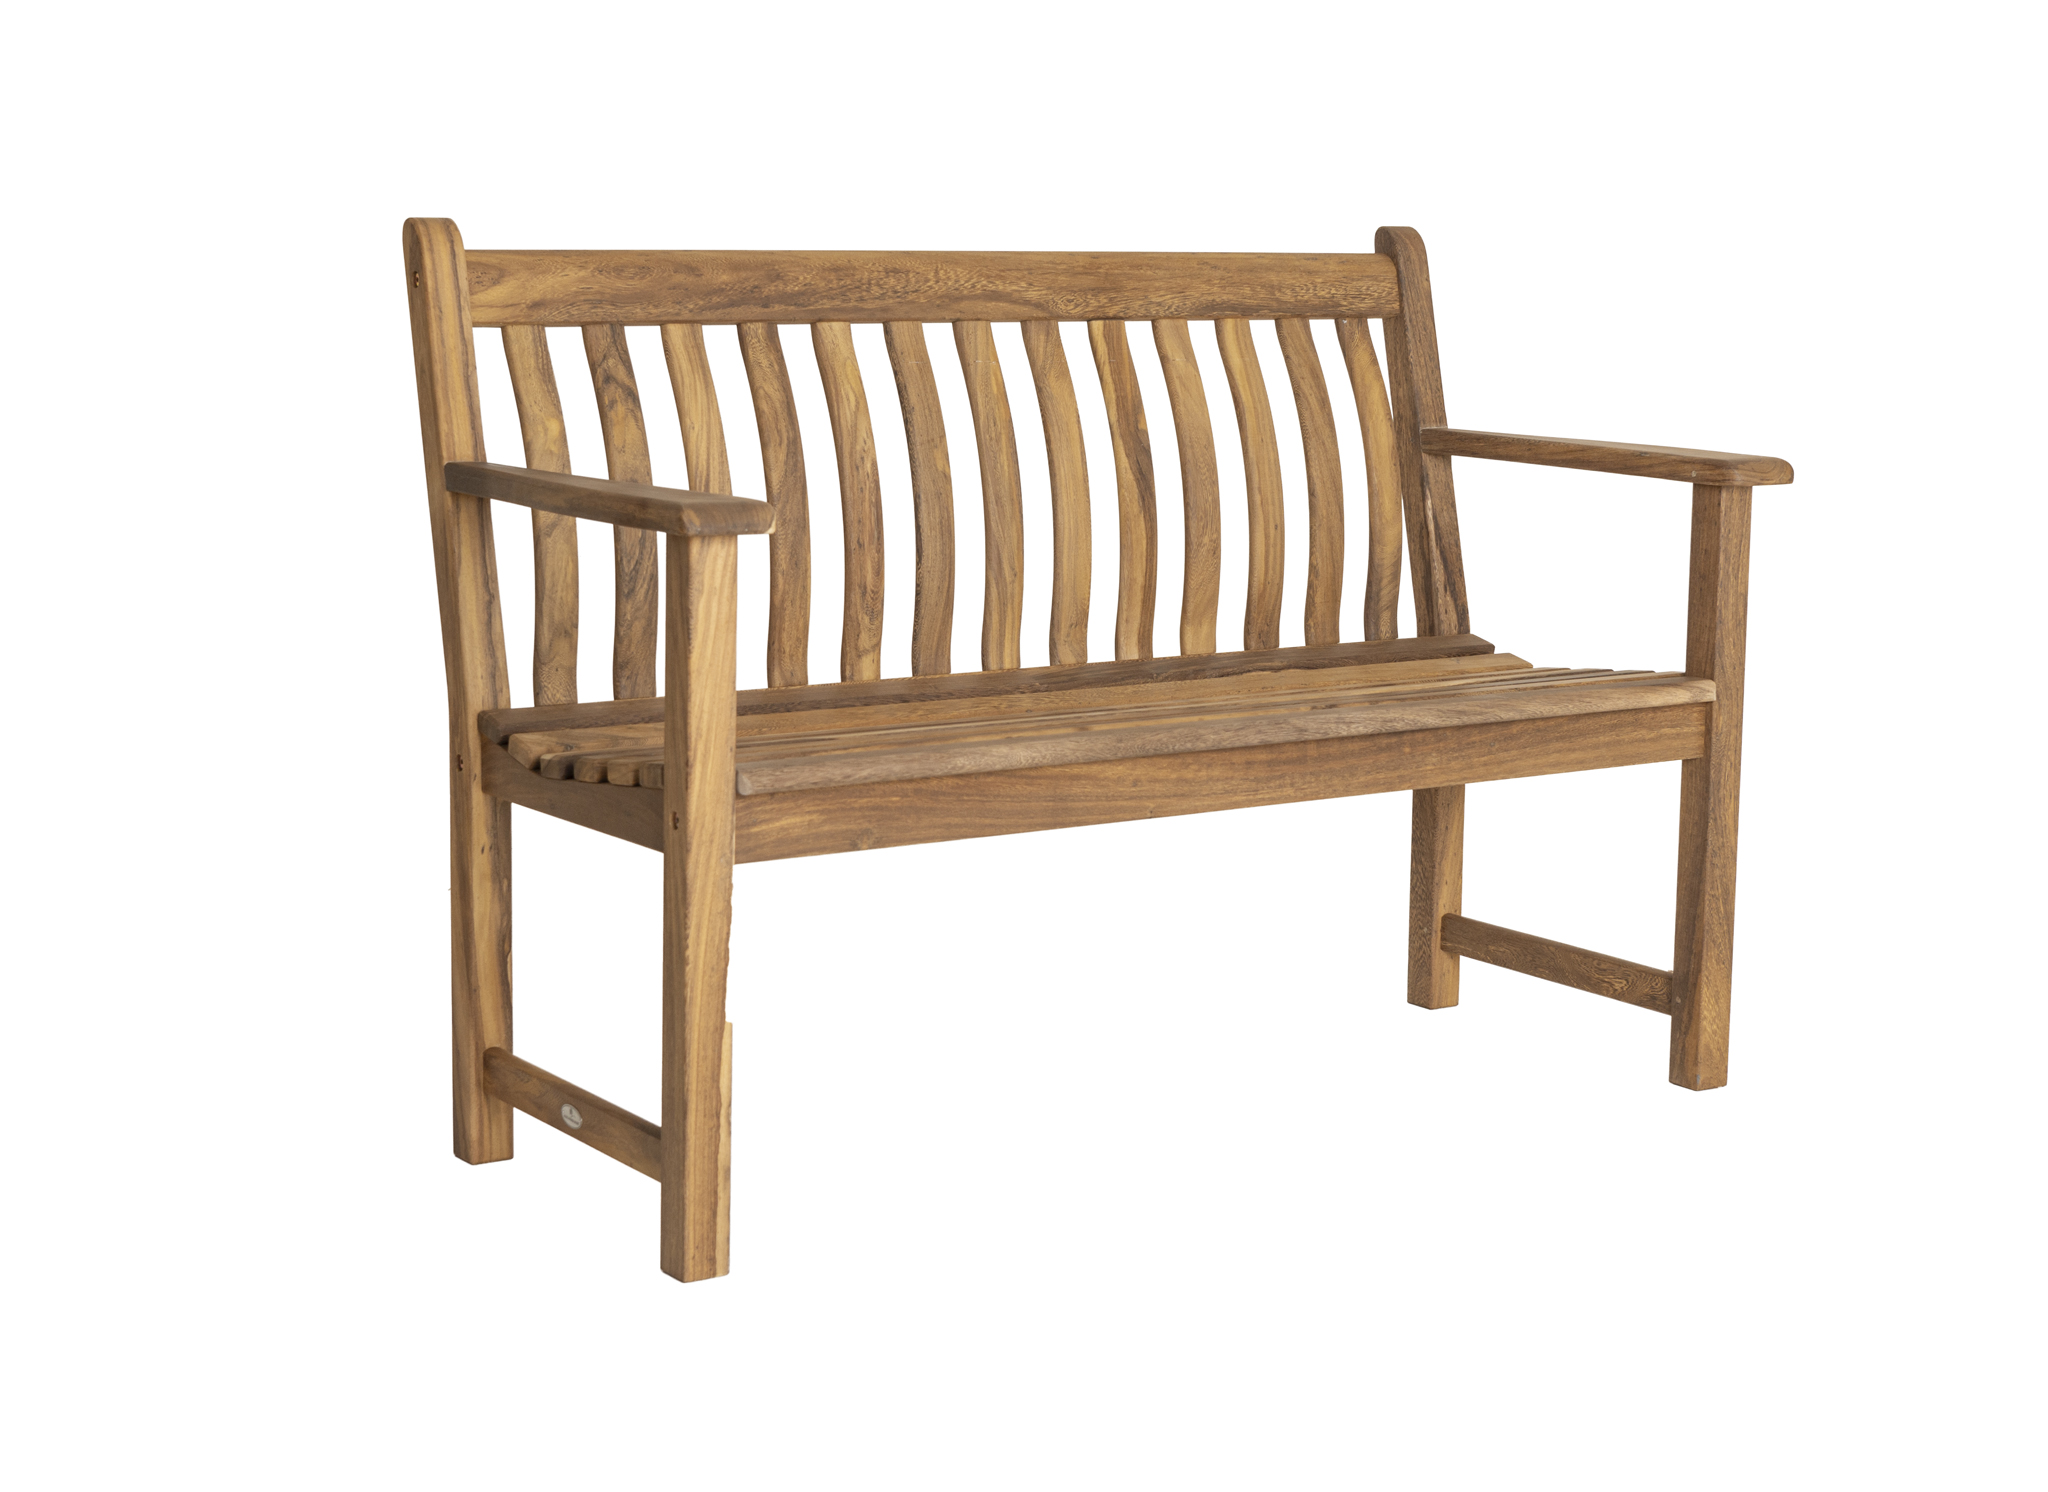 Albany Broadfield Bench 4ft